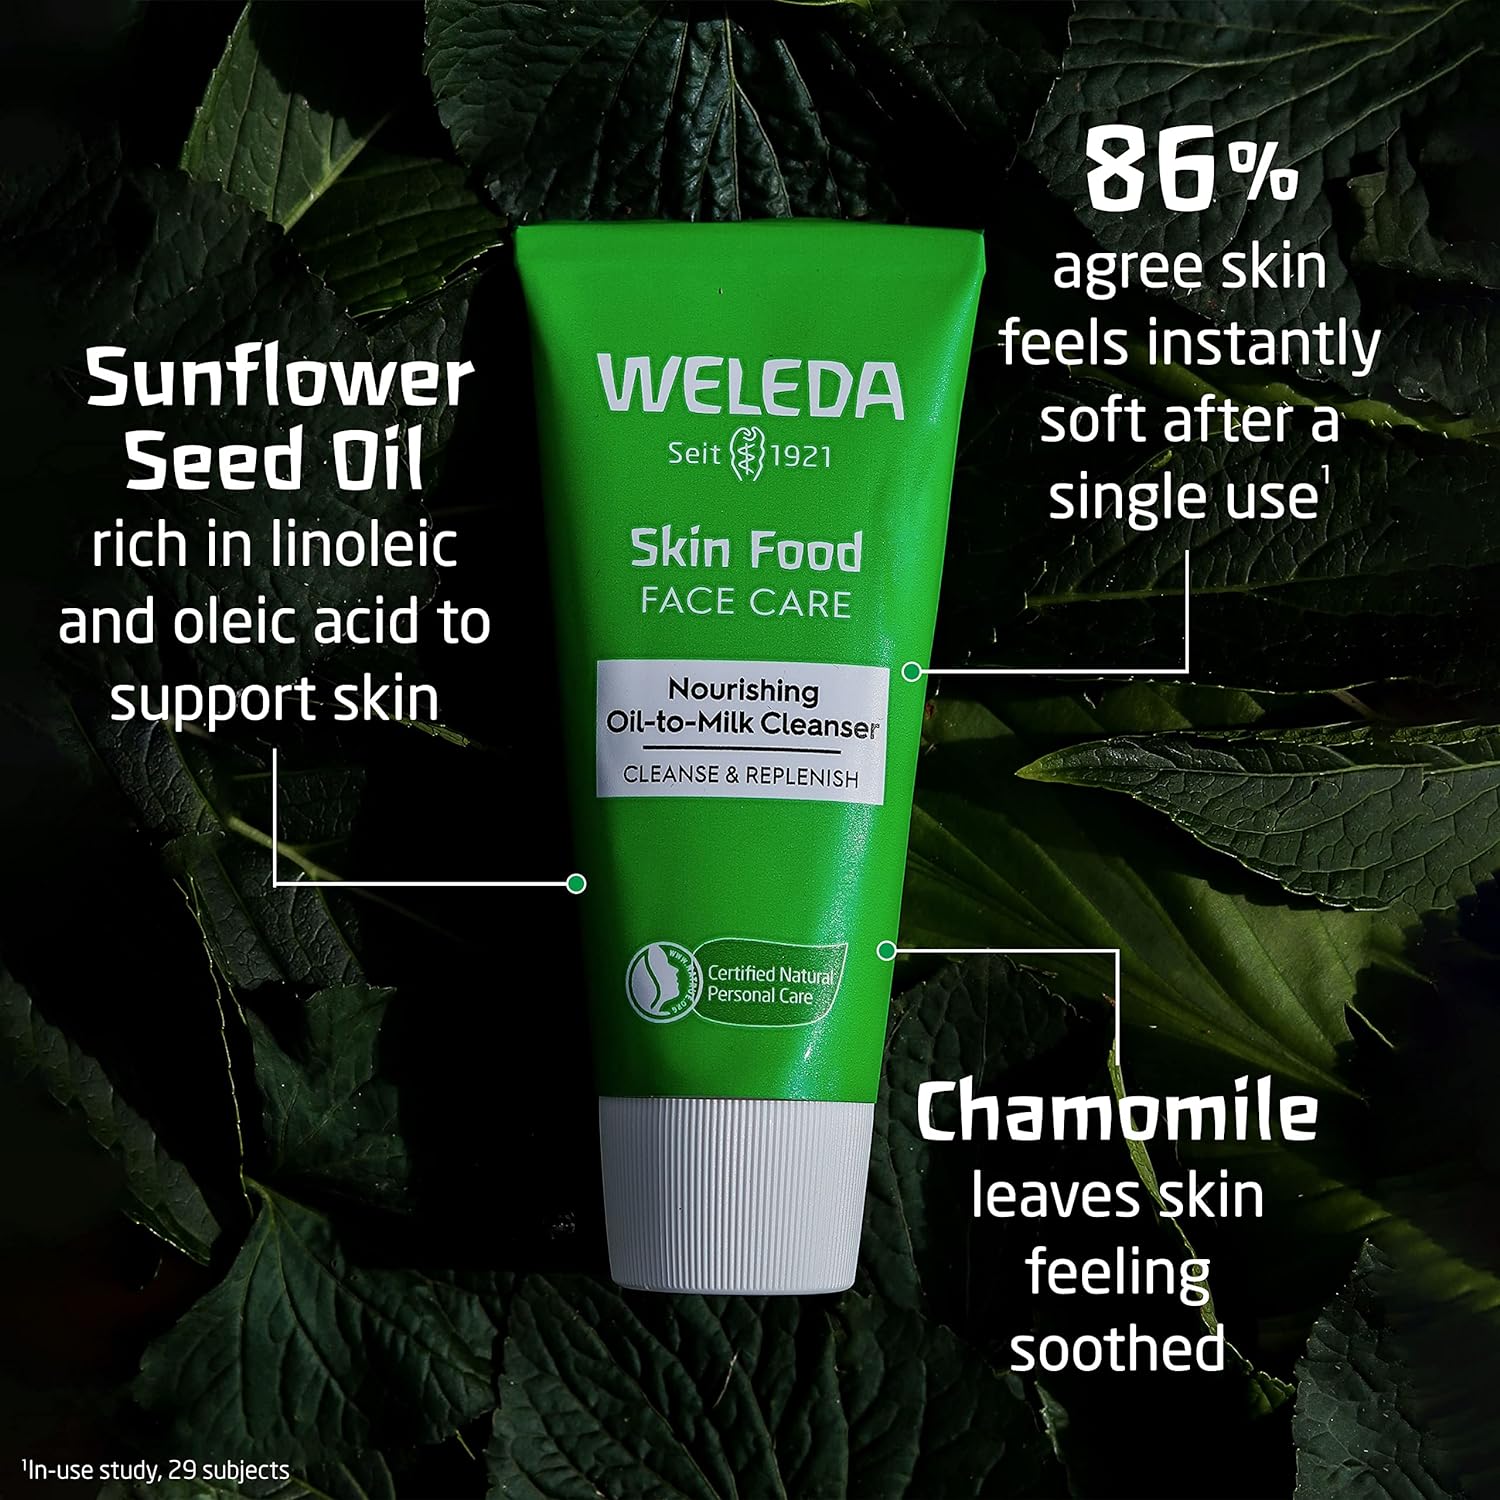 Weleda Skin Food Face Care Nourishing Oil-to-Milk Cleanser, 2.5 Fluid Ounce, Plant Rich Cleanser with Sunflower Seed Oil, Chamomile Extract and Pansy : Beauty & Personal Care